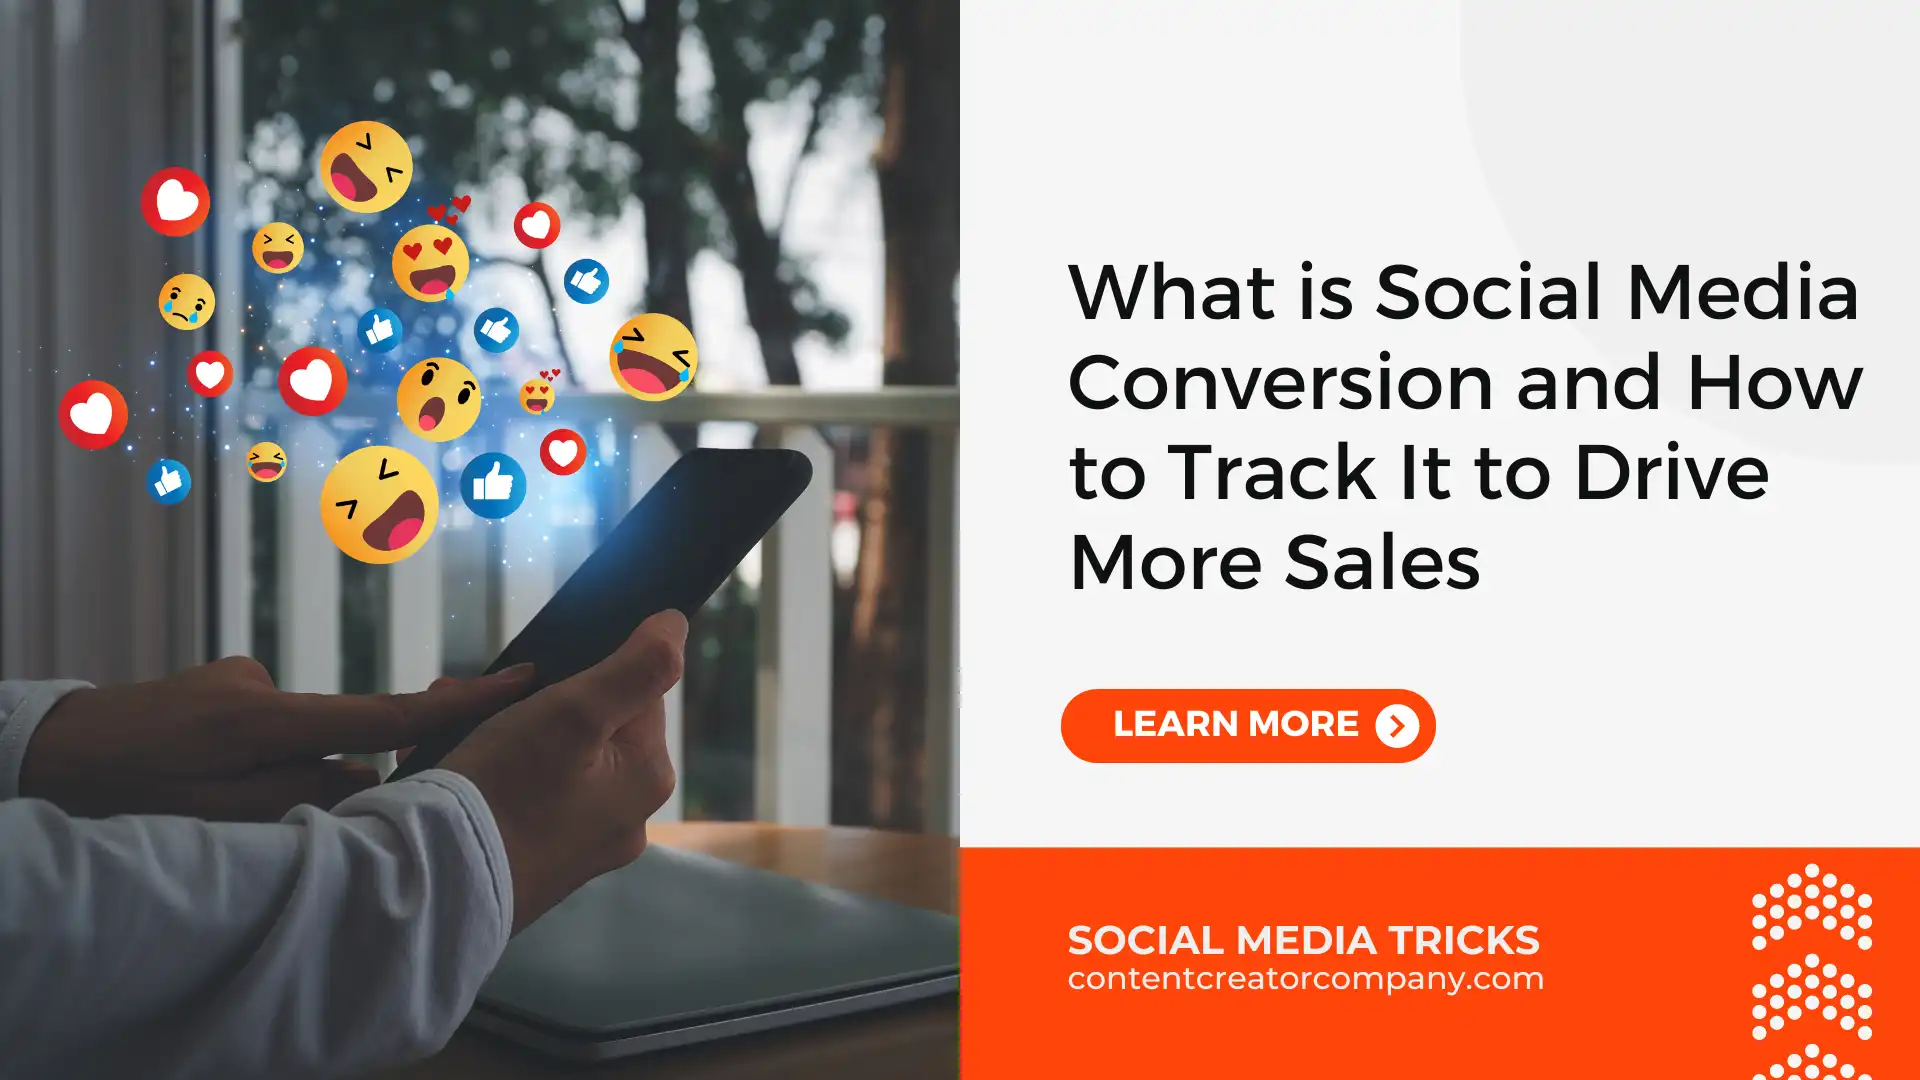 What is Social Media Conversion and How to Track It to Drive More Sales